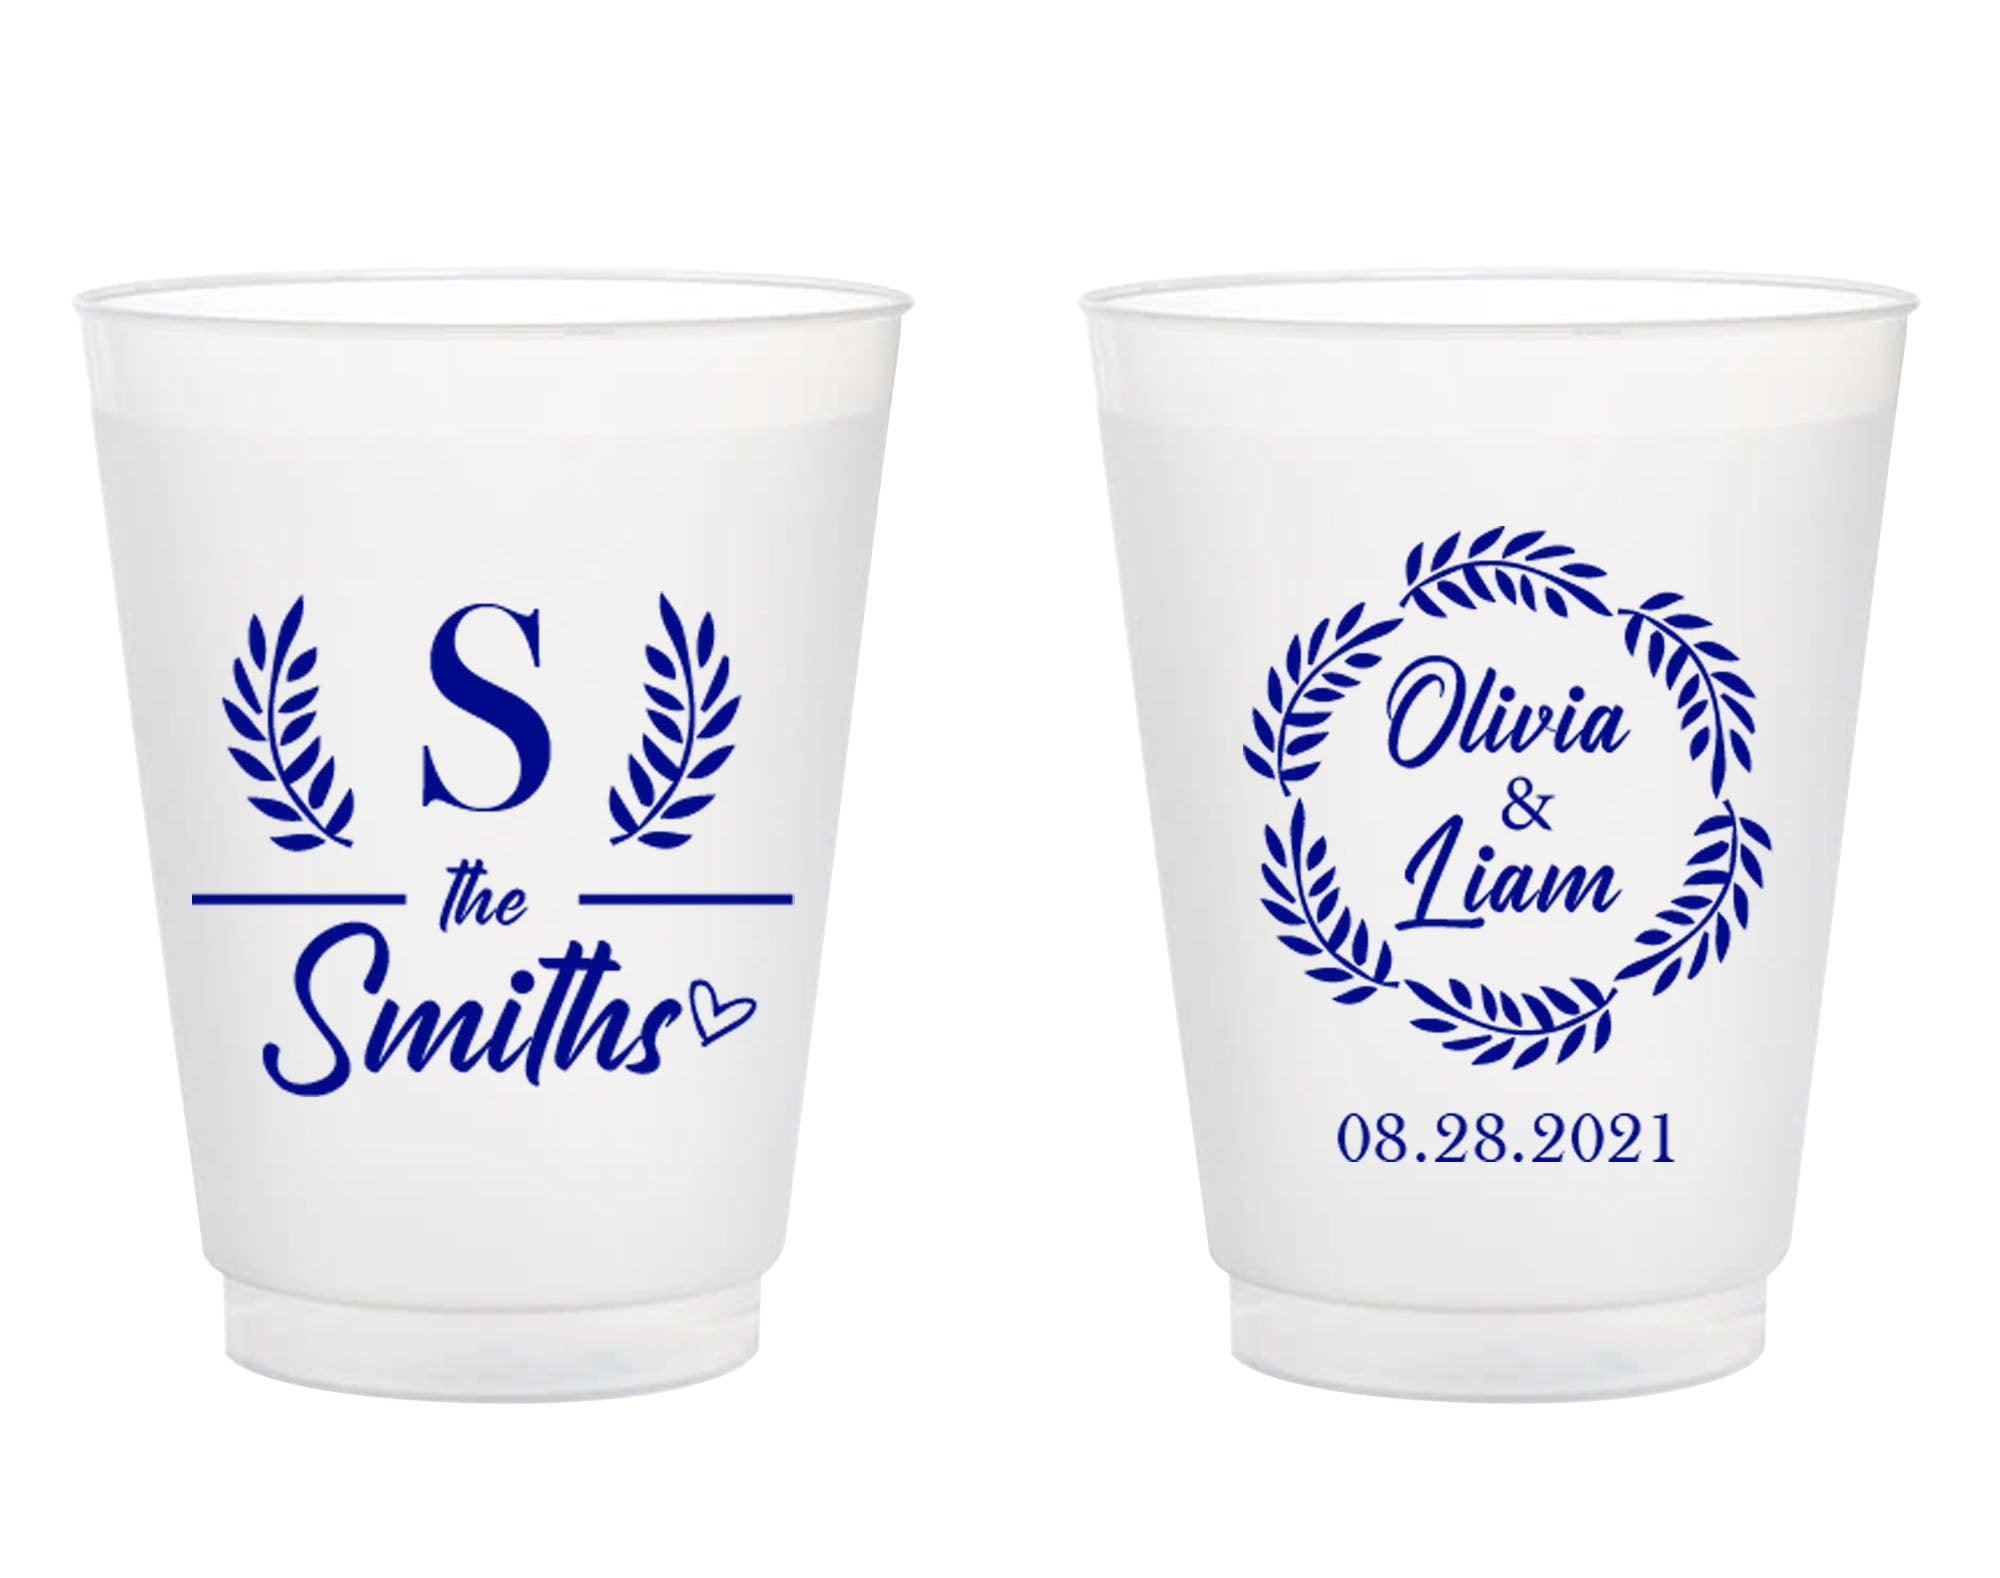 Tis The Season - 9oz Frosted Unbreakable Plastic Cup #184 - Custom - Bridal  Wedding Favors, Wedding Cups, Party Cups, Favor